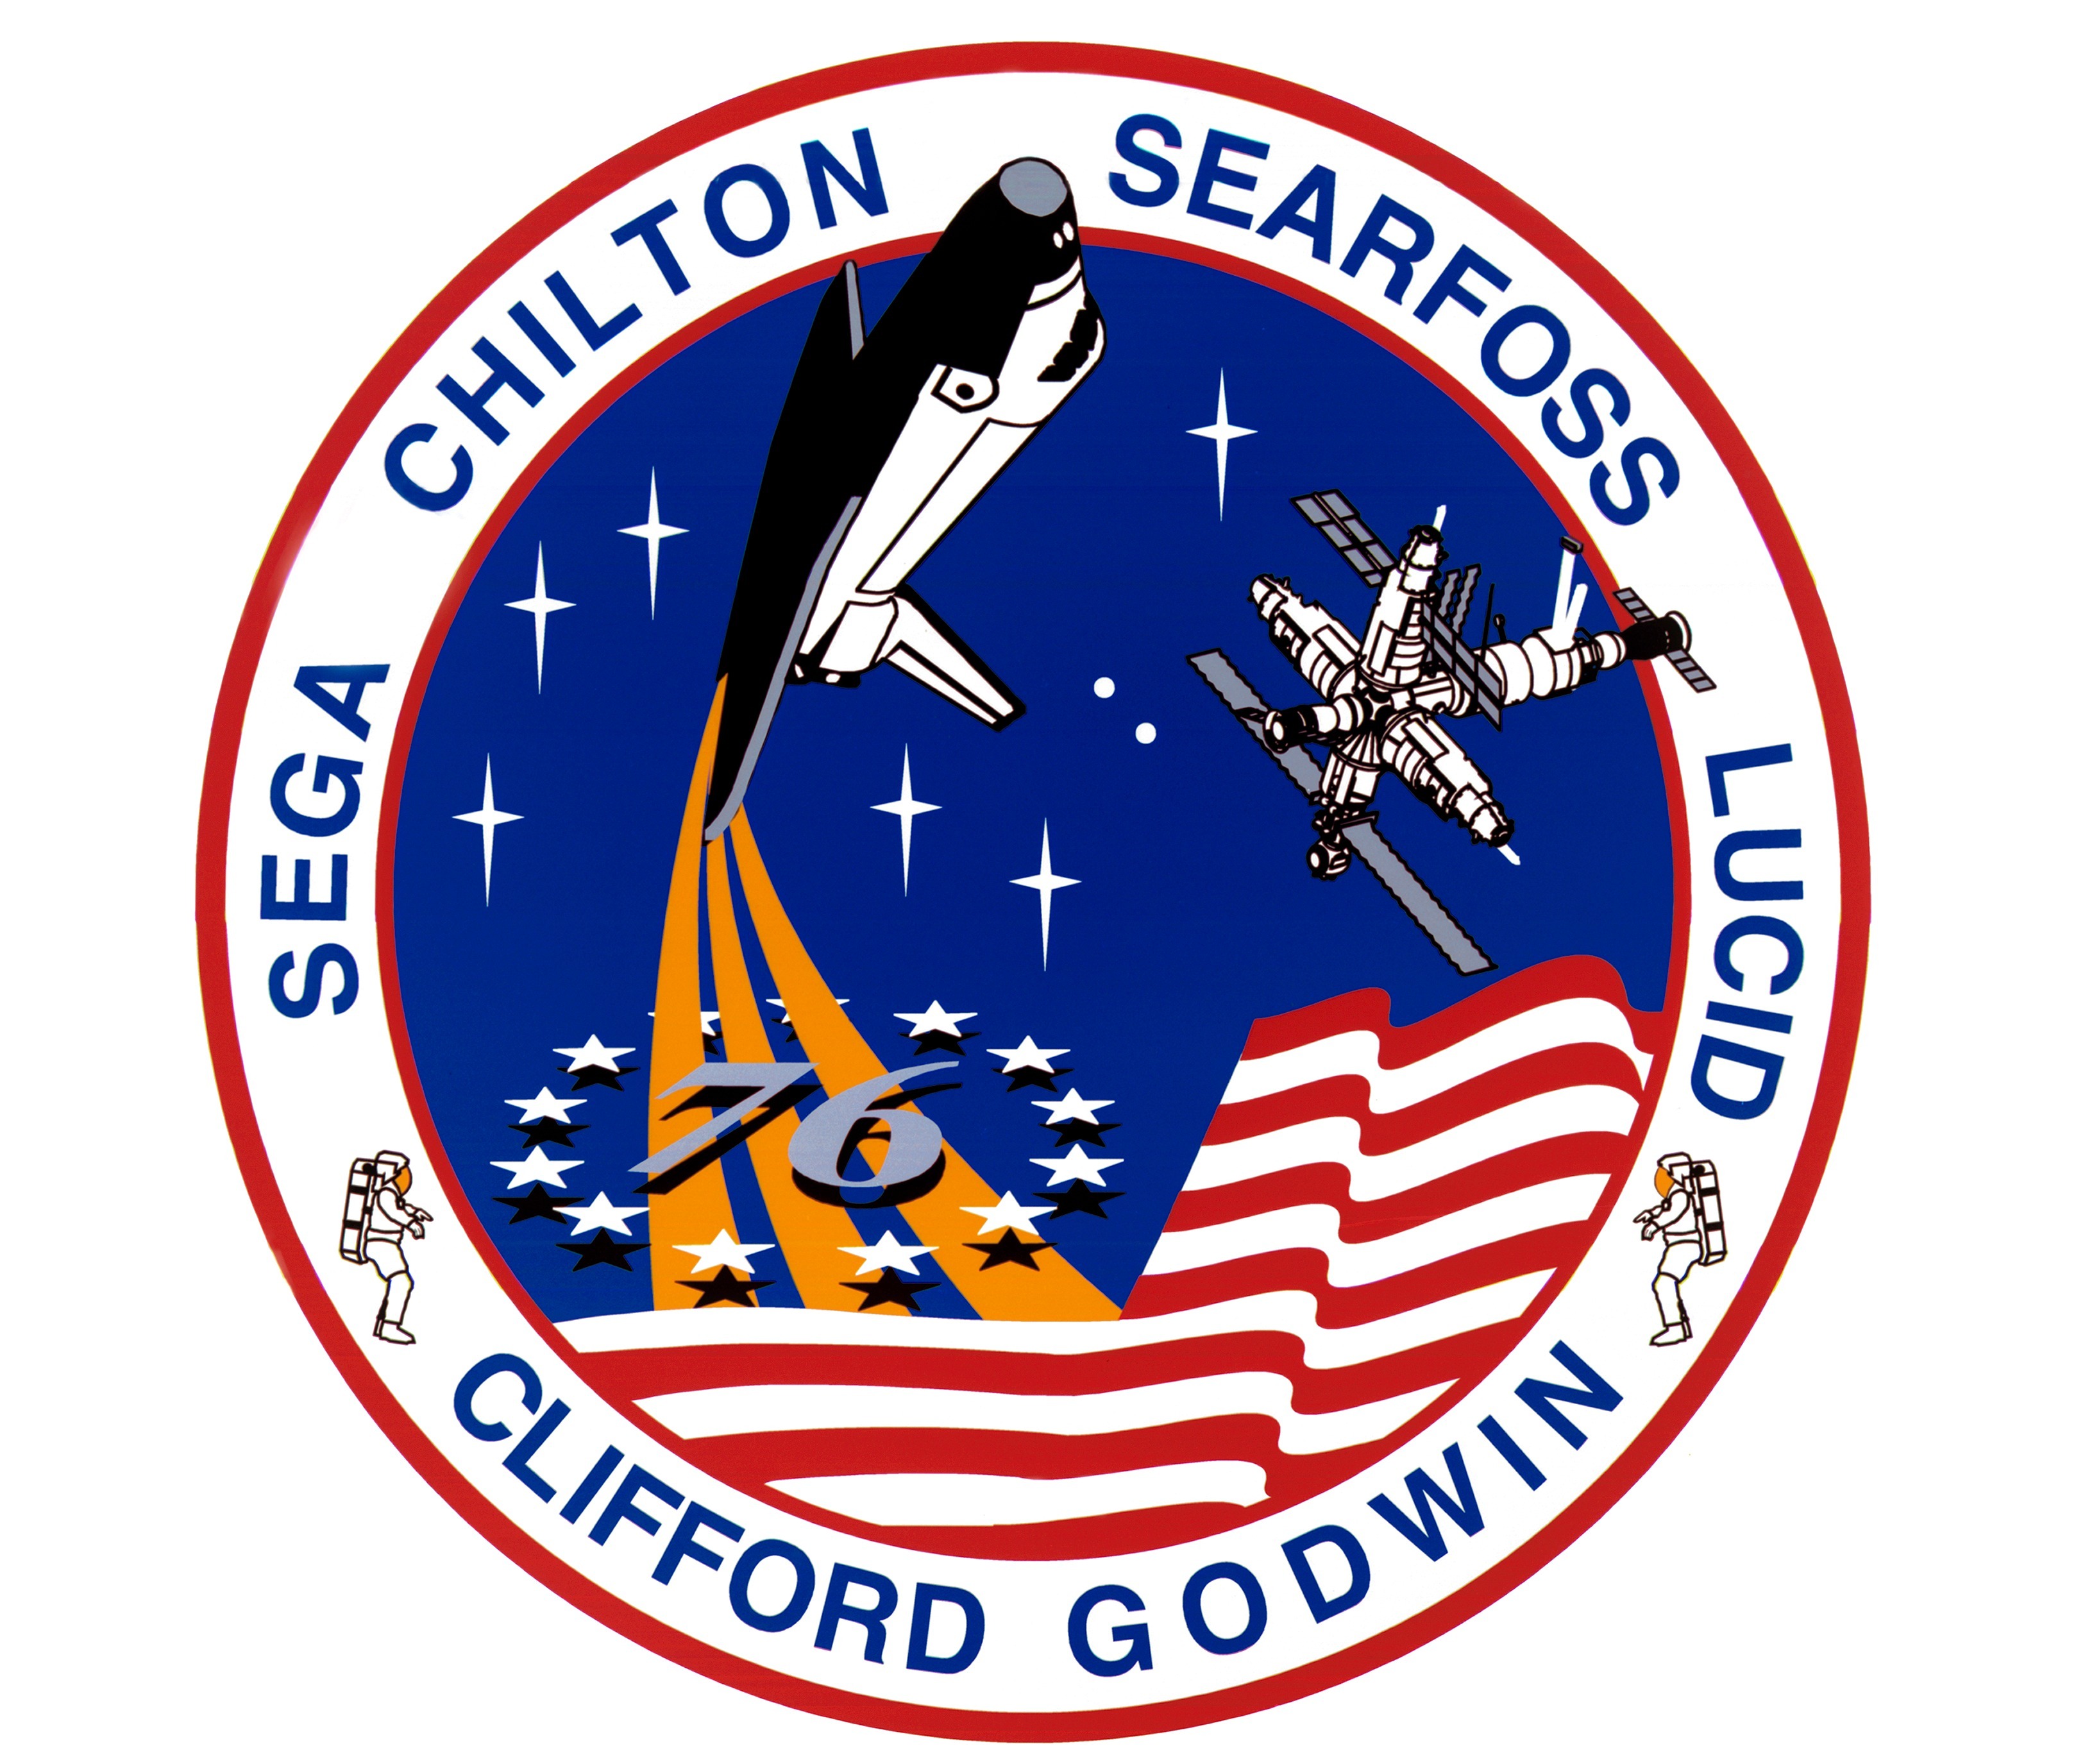 STS-76 Patch